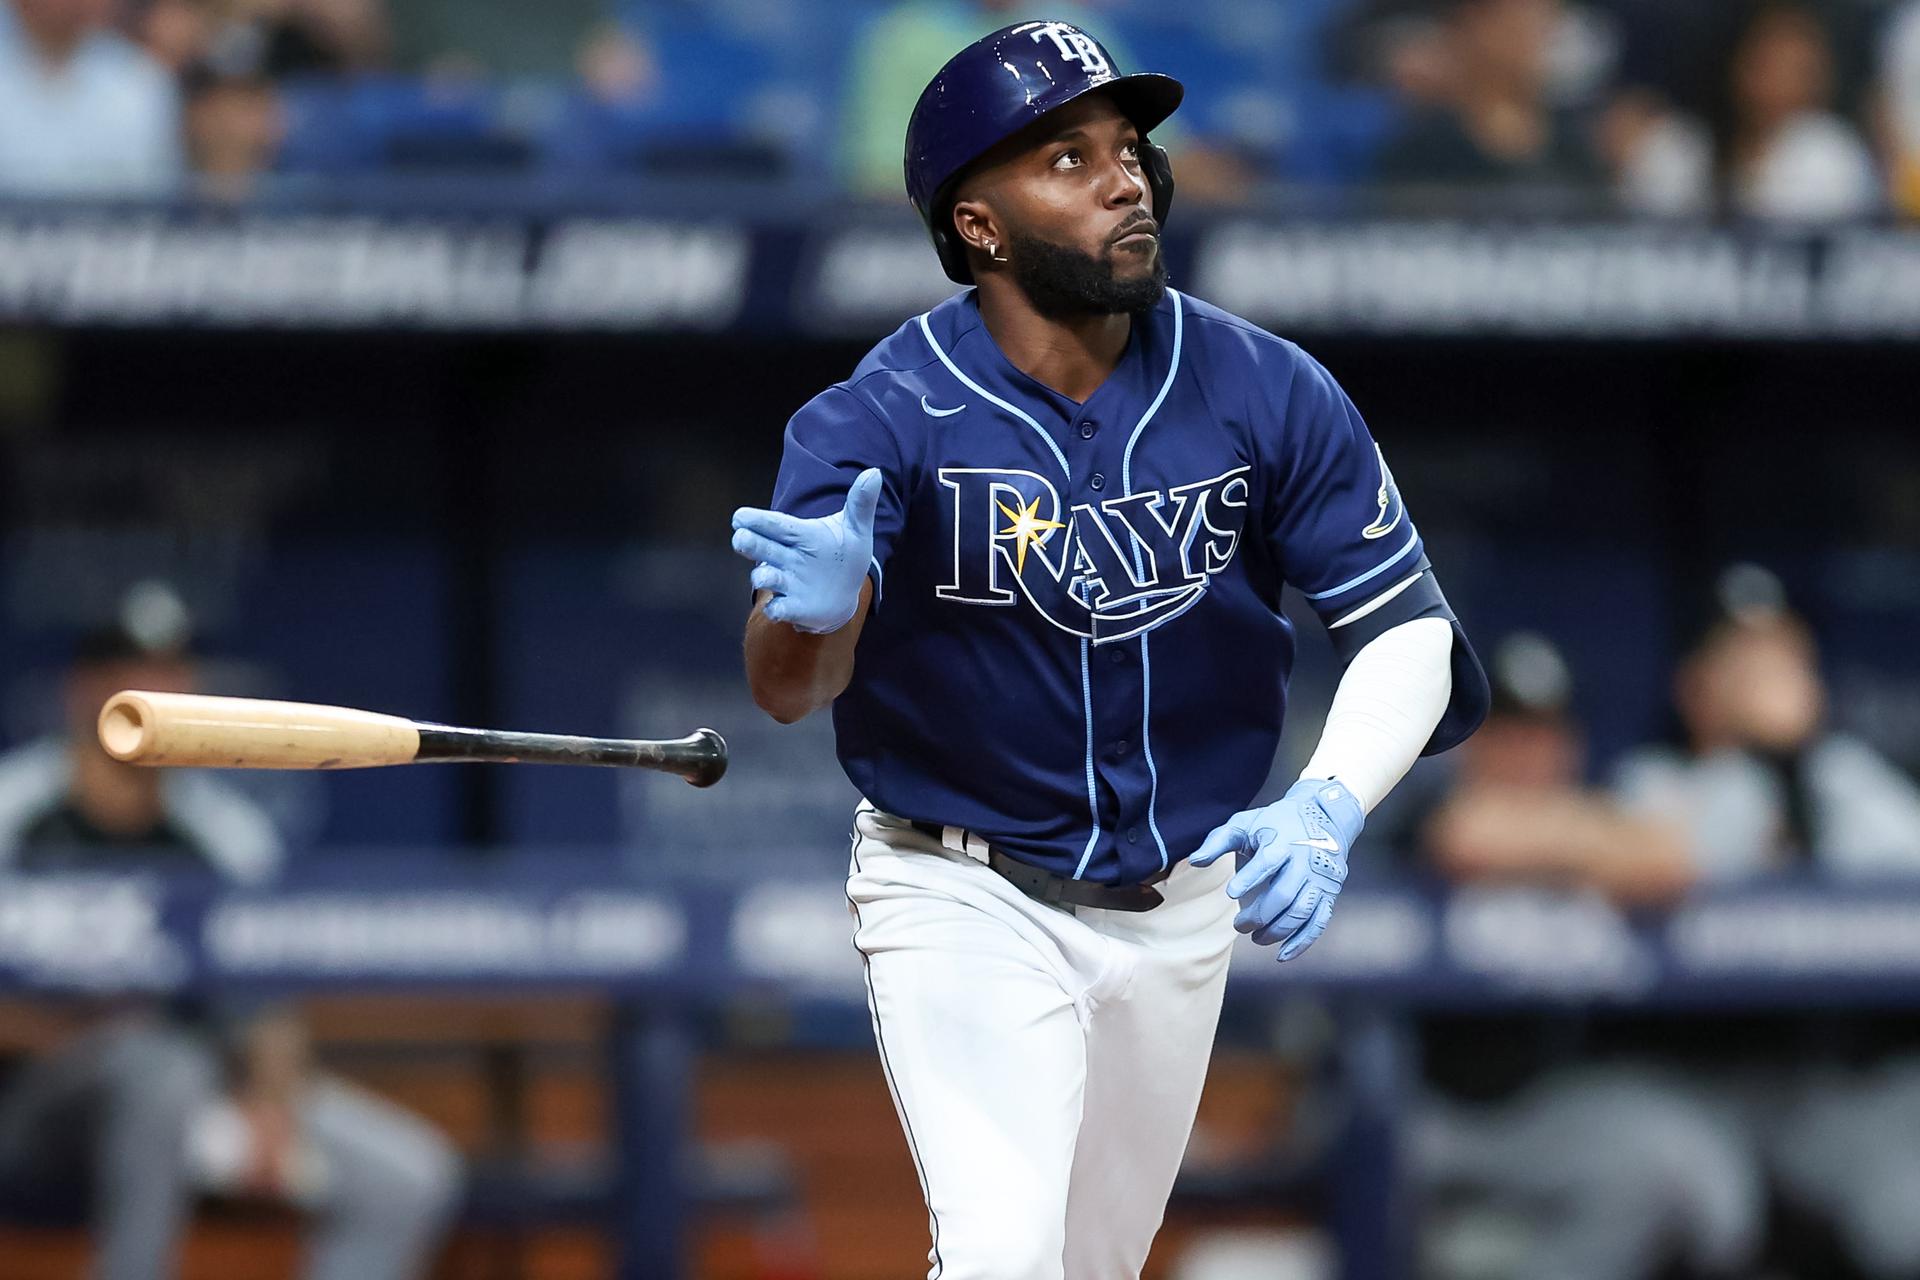 Randy Arozarena's salary with the Rays is finally revealed showing a  significantly bigger contract deal